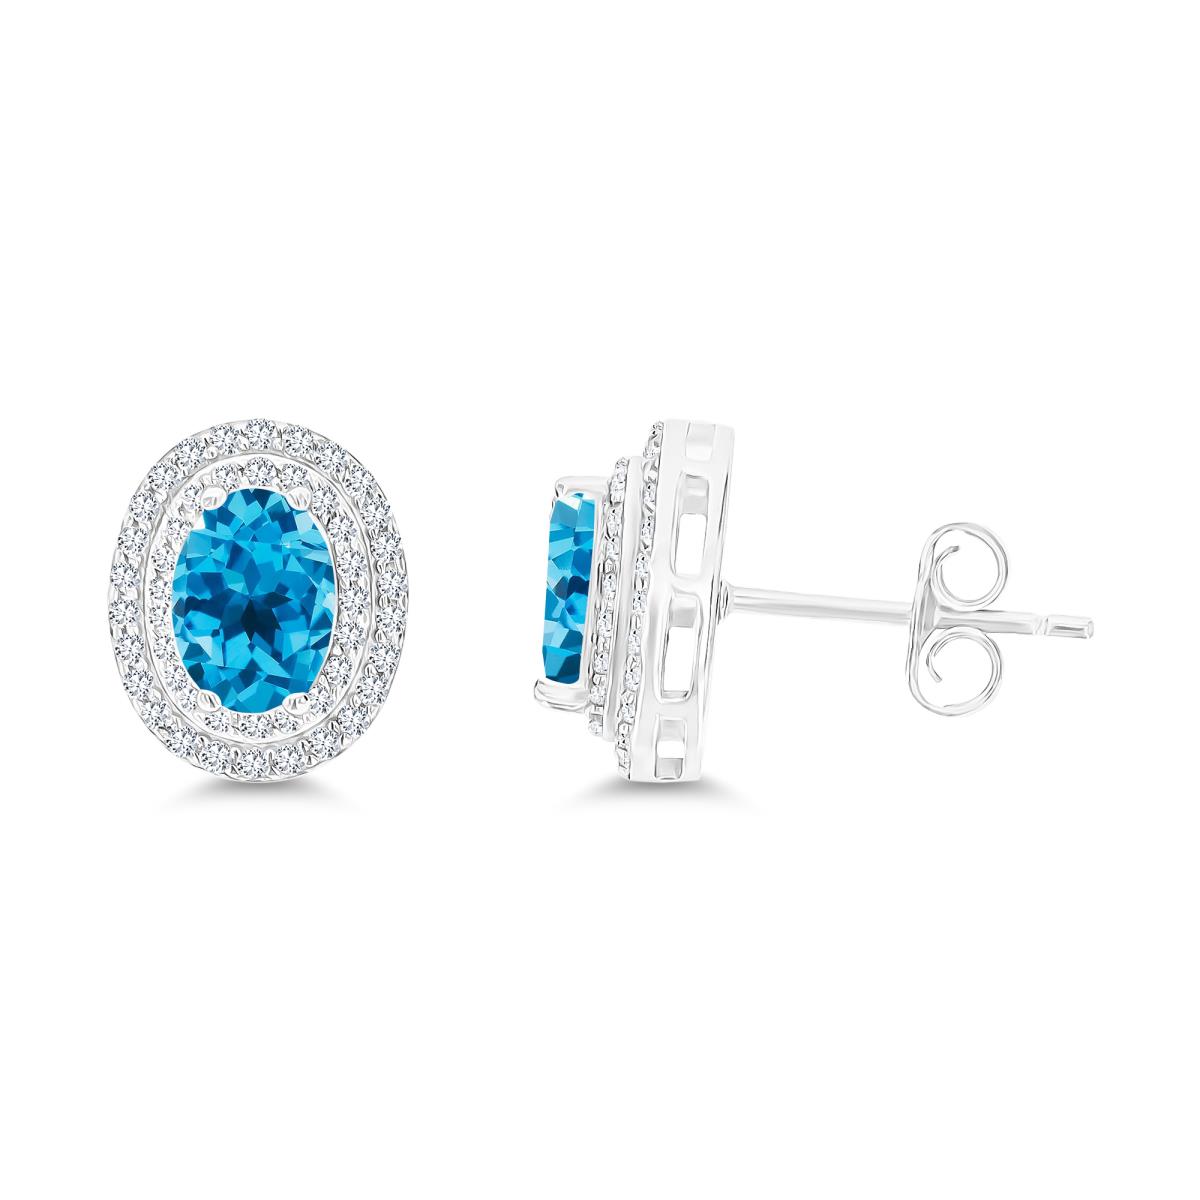 Sterling Silver Rhodium 7x5mm Oval Blue Topaz & Cr White Sapphire Halo Earrings